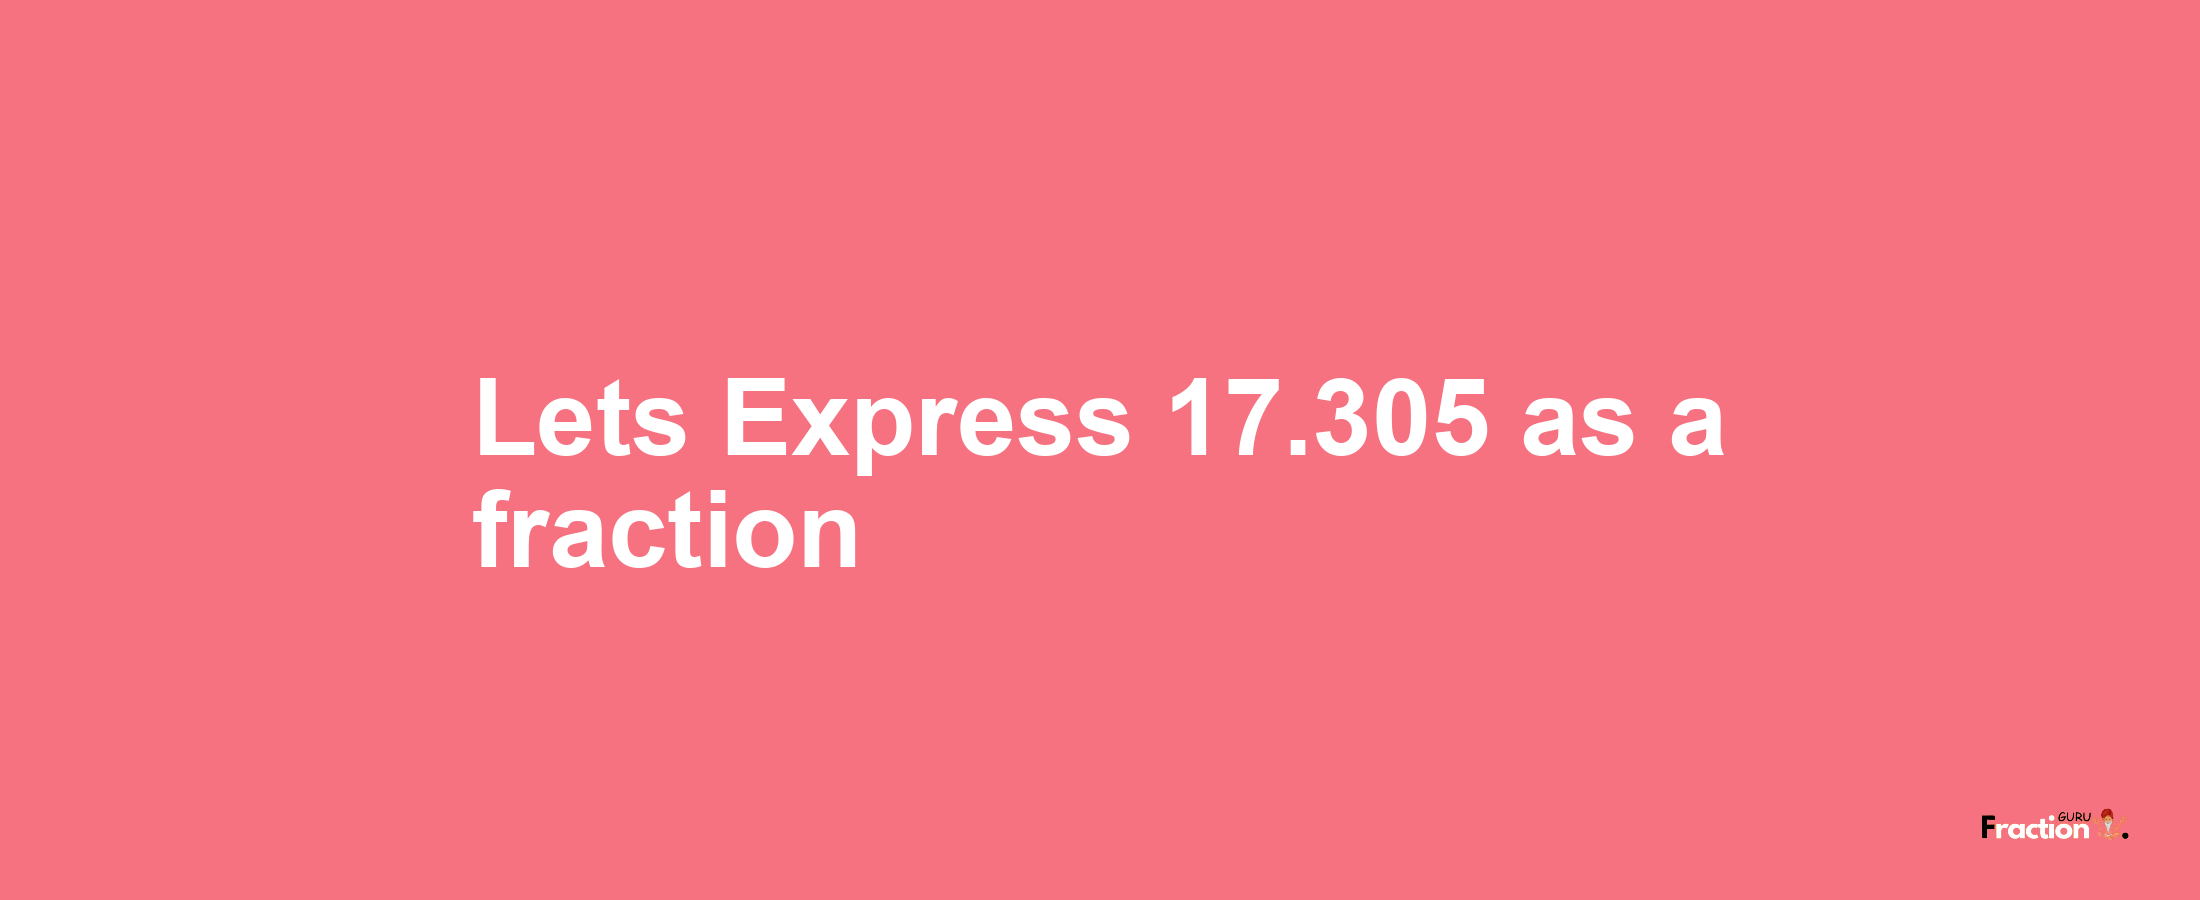 Lets Express 17.305 as afraction